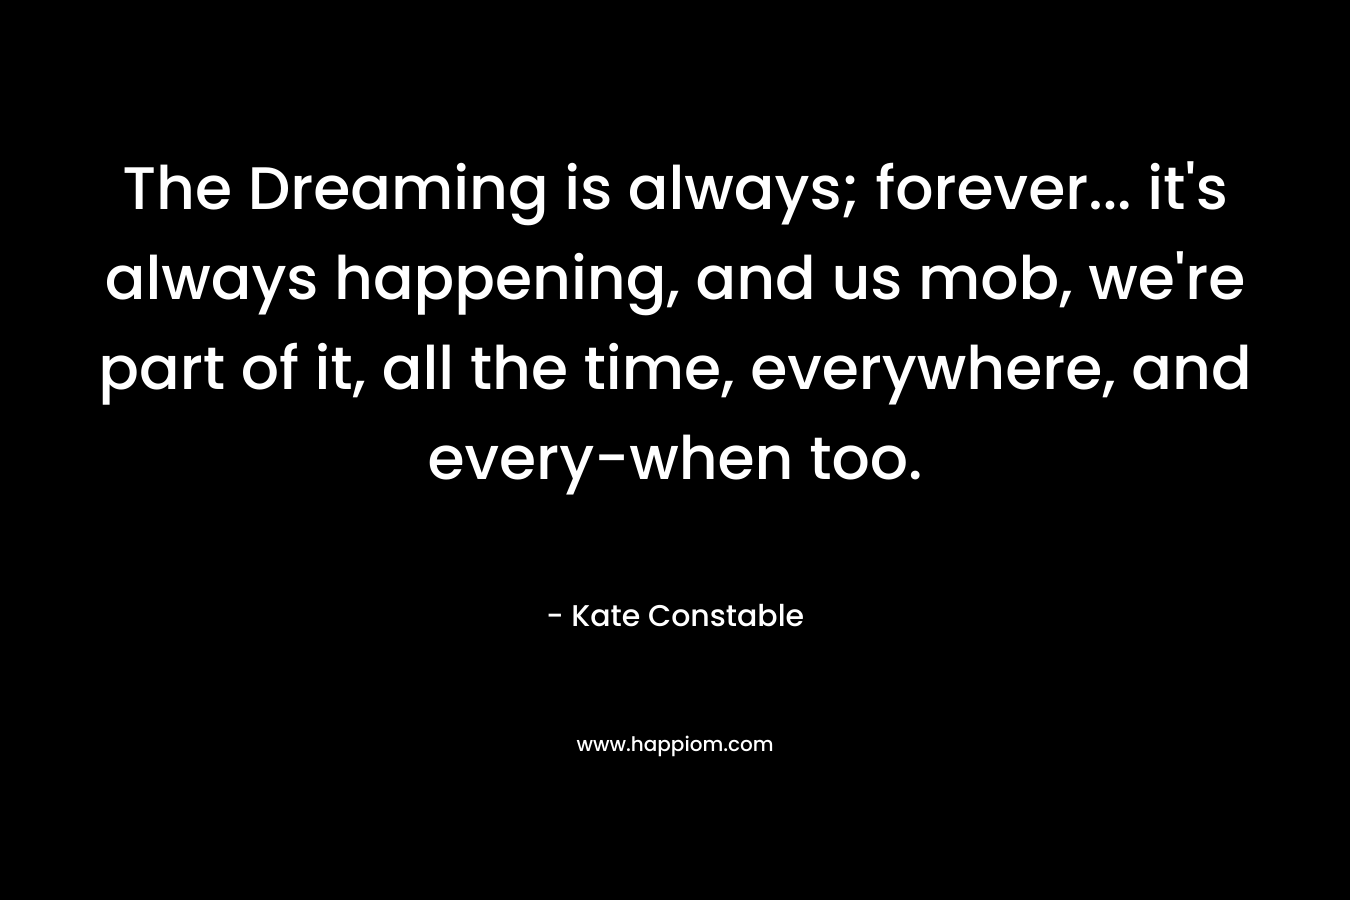 The Dreaming is always; forever… it’s always happening, and us mob, we’re part of it, all the time, everywhere, and every-when too. – Kate Constable